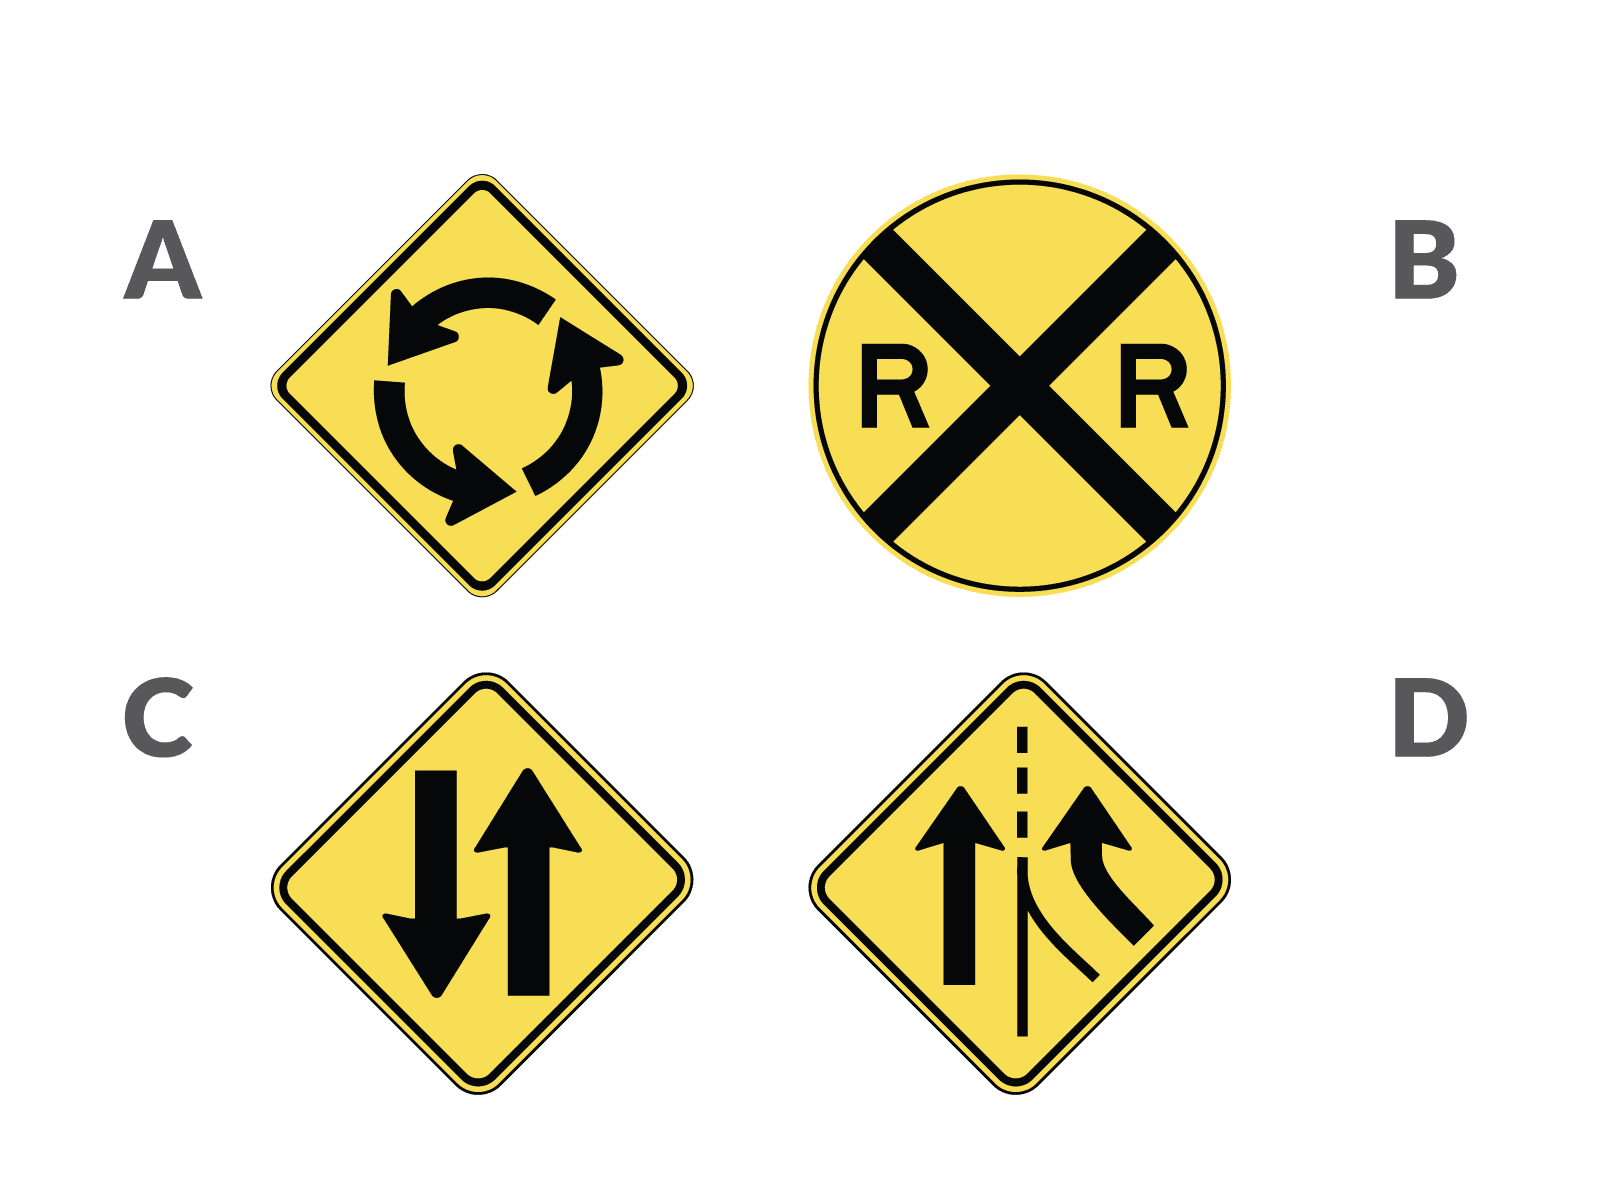 Permit Test Road Signs